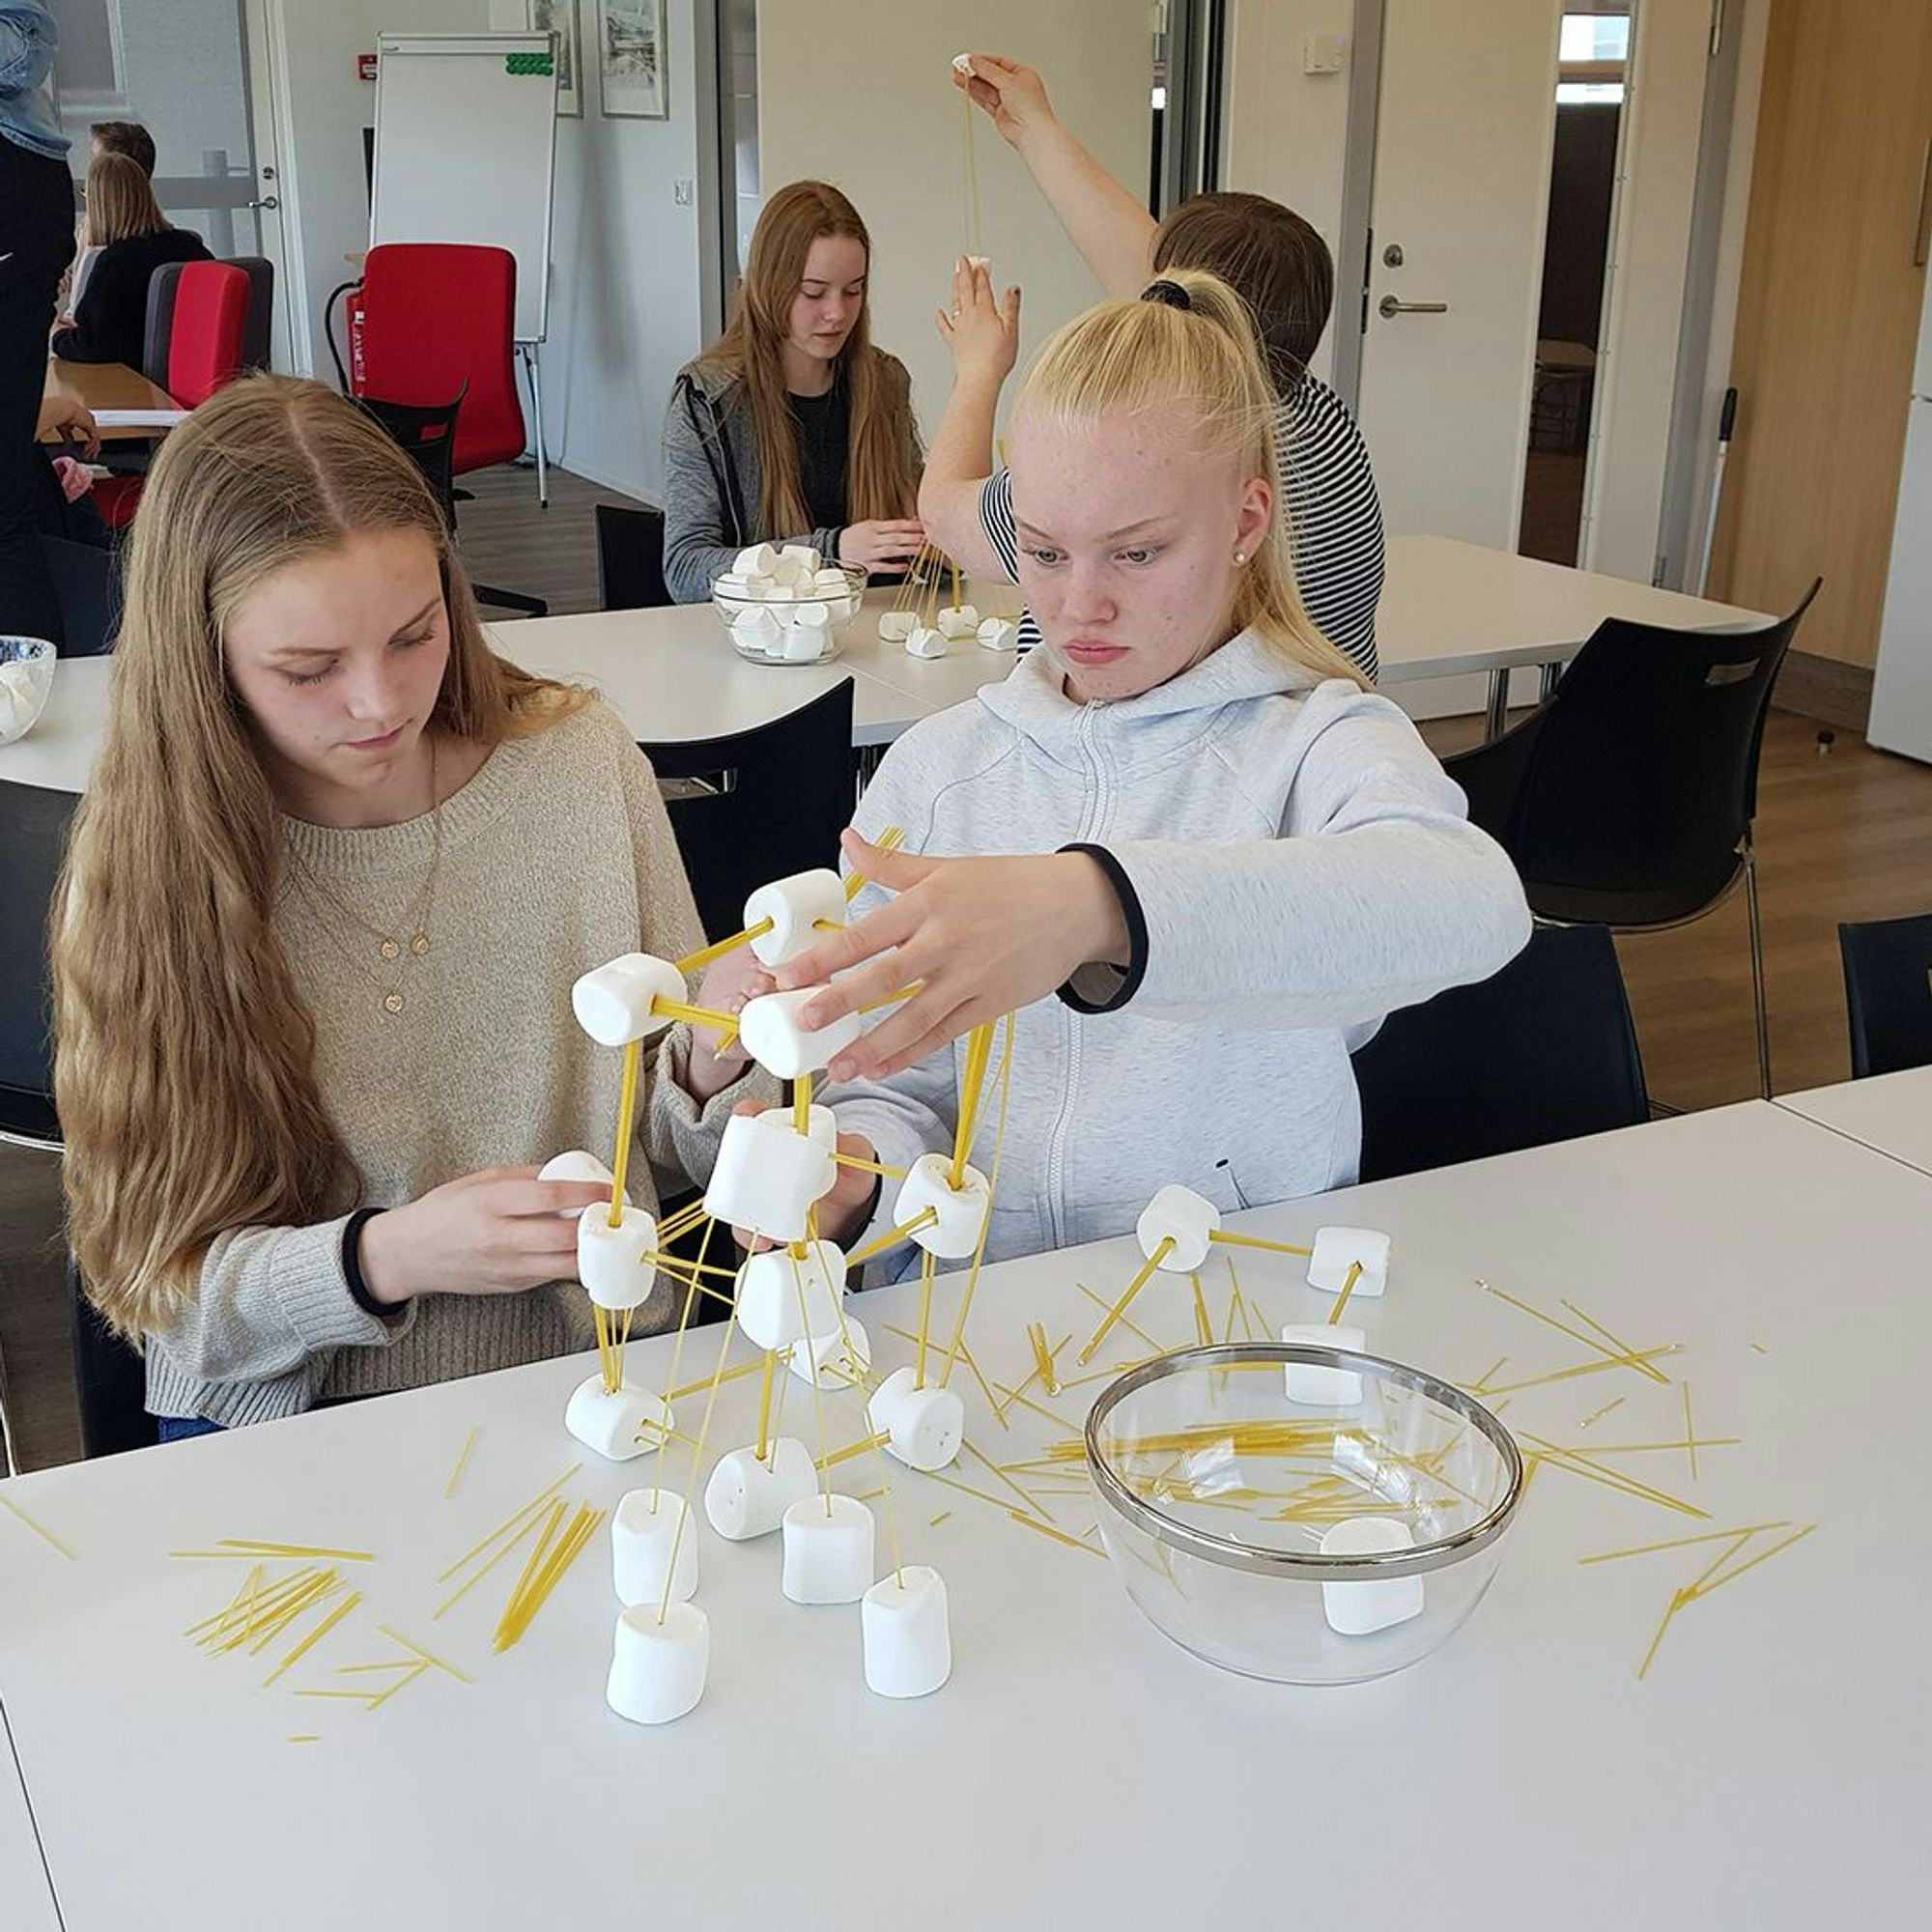 Two girls building something using spaghetti and marshmallow 